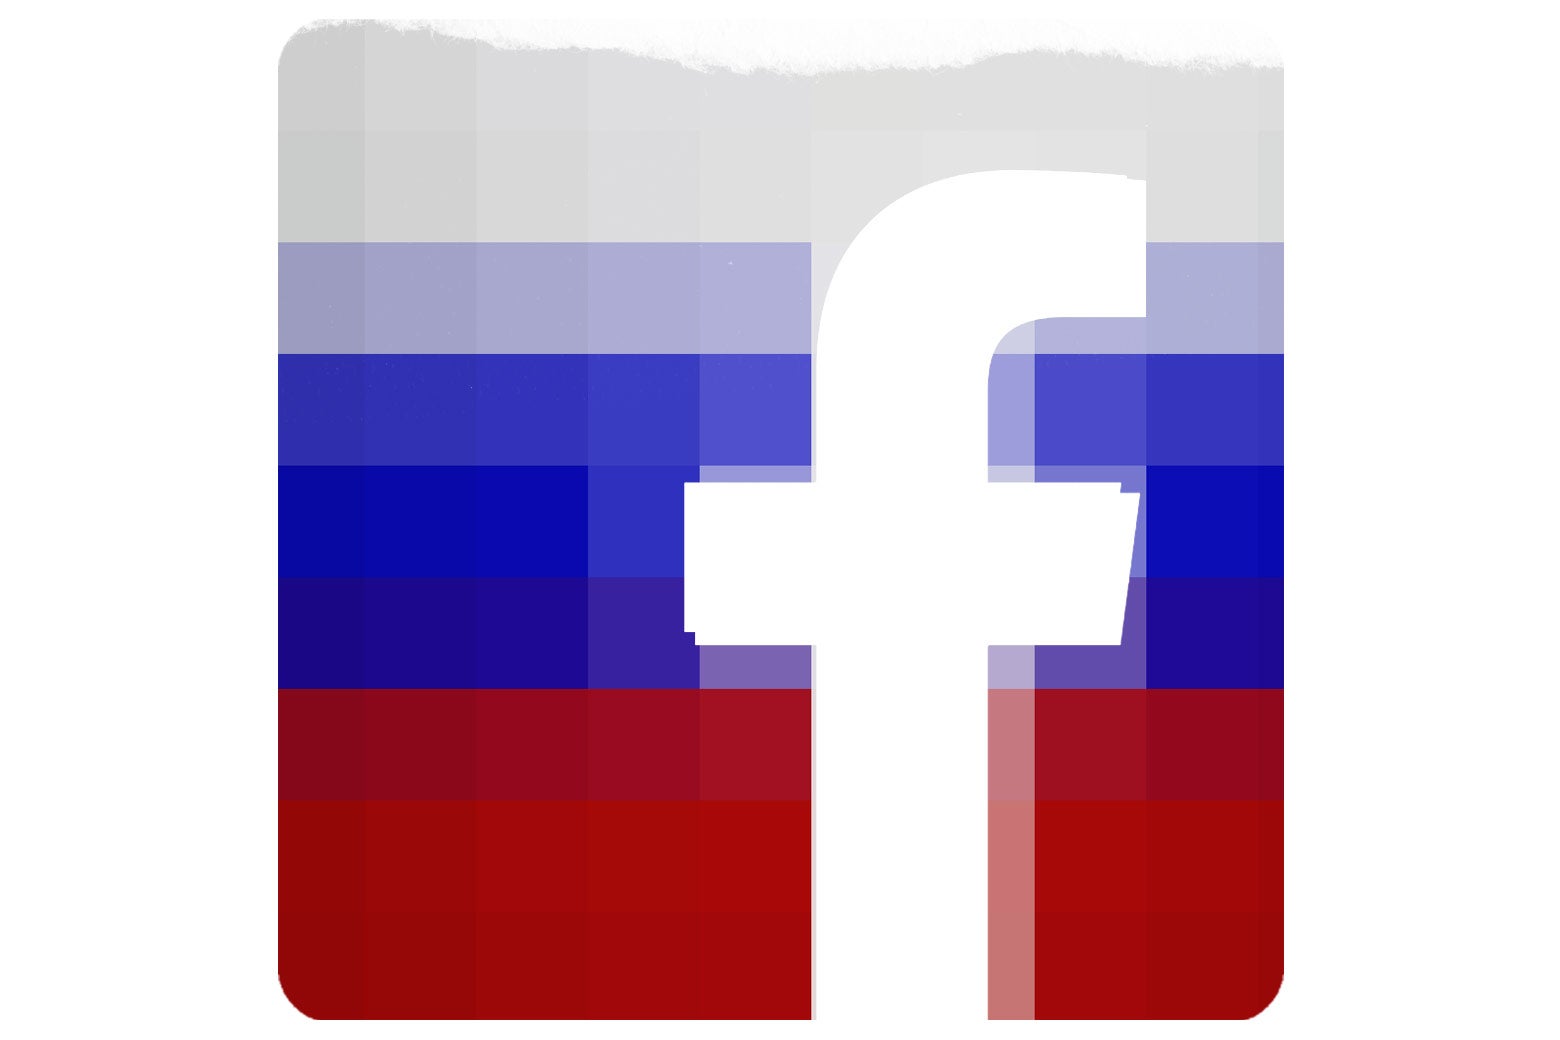 The Facebook logo fused with a Russian flag